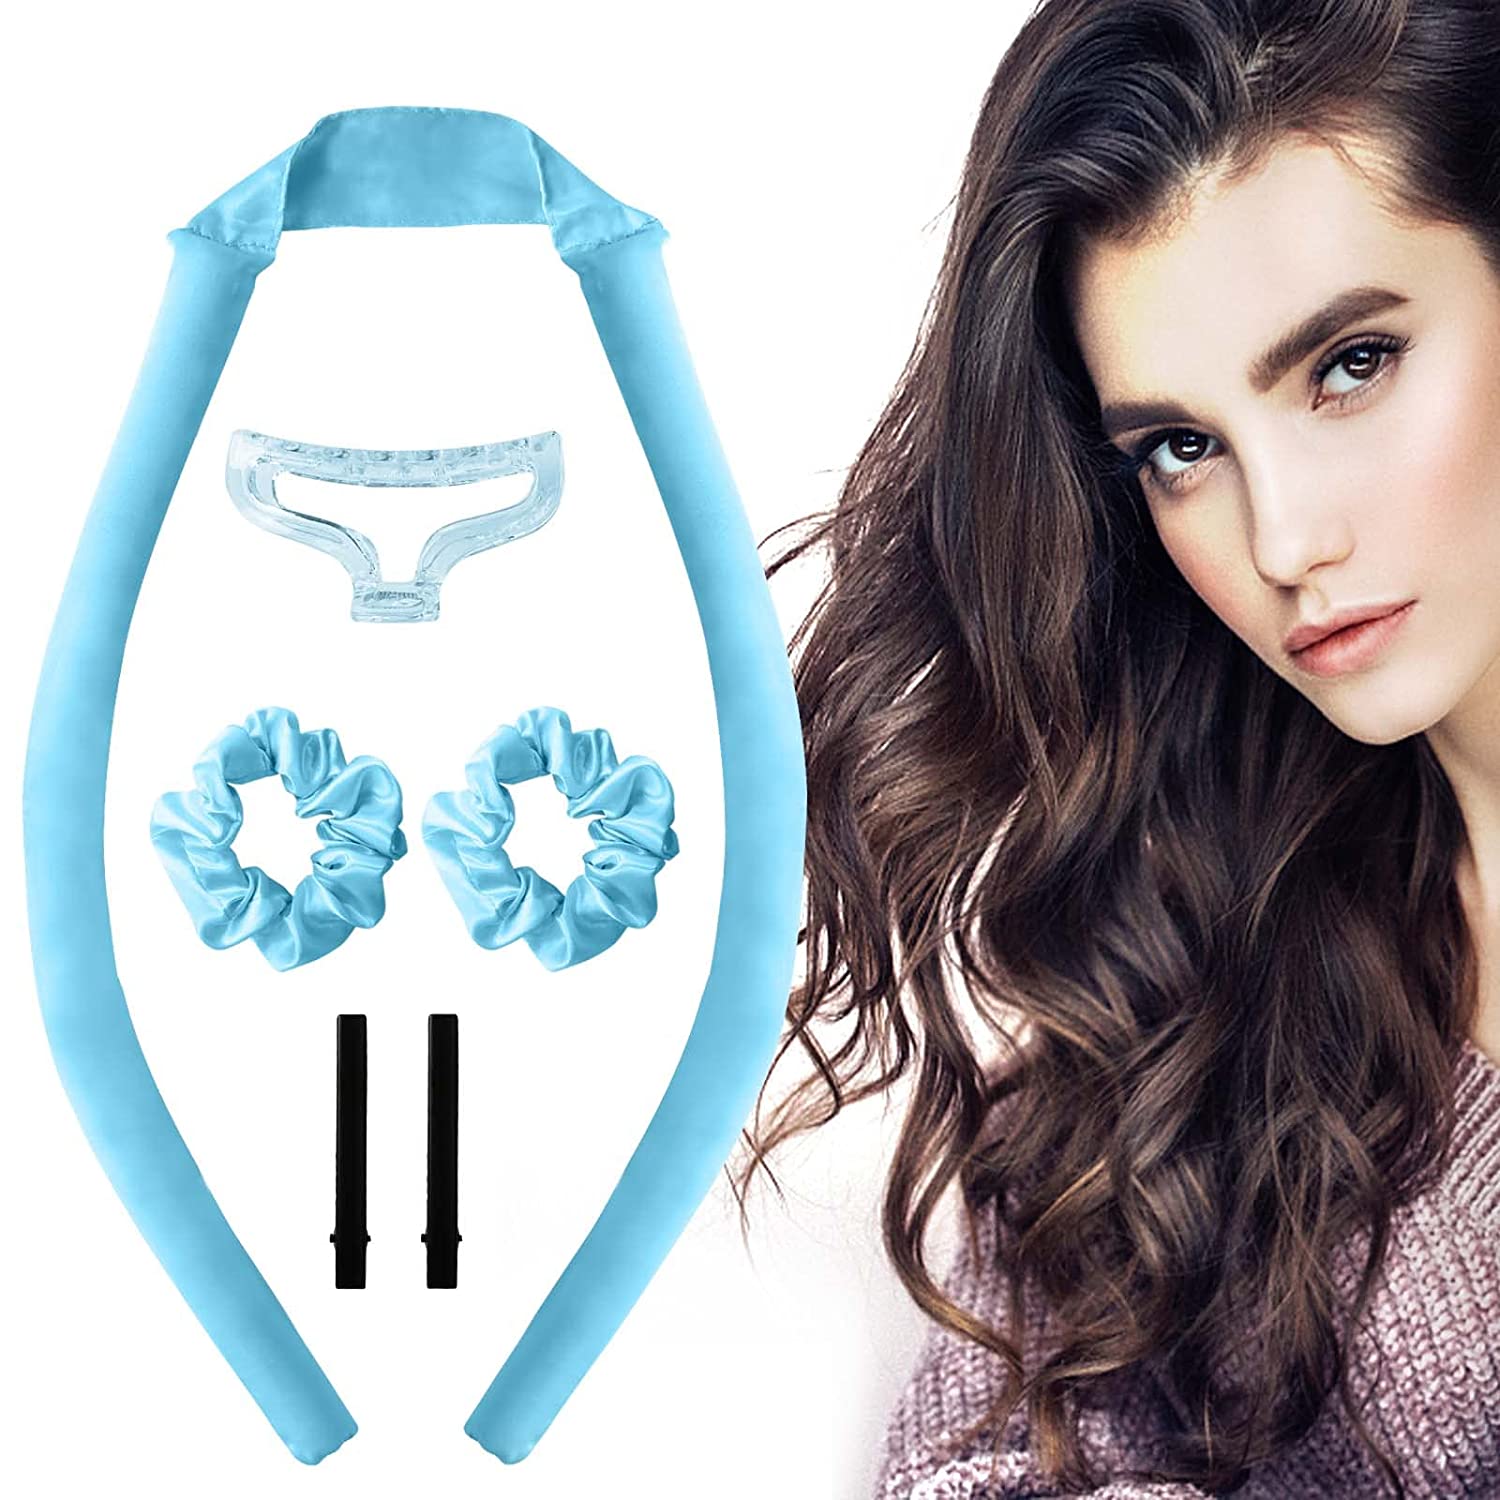 Esteopt Heatless curlers, silk hair curlers, curlers, heat-free curlers, headband hair curlers, curling iron without damaging the hair, for all DIY styling women all medium, ‎blue